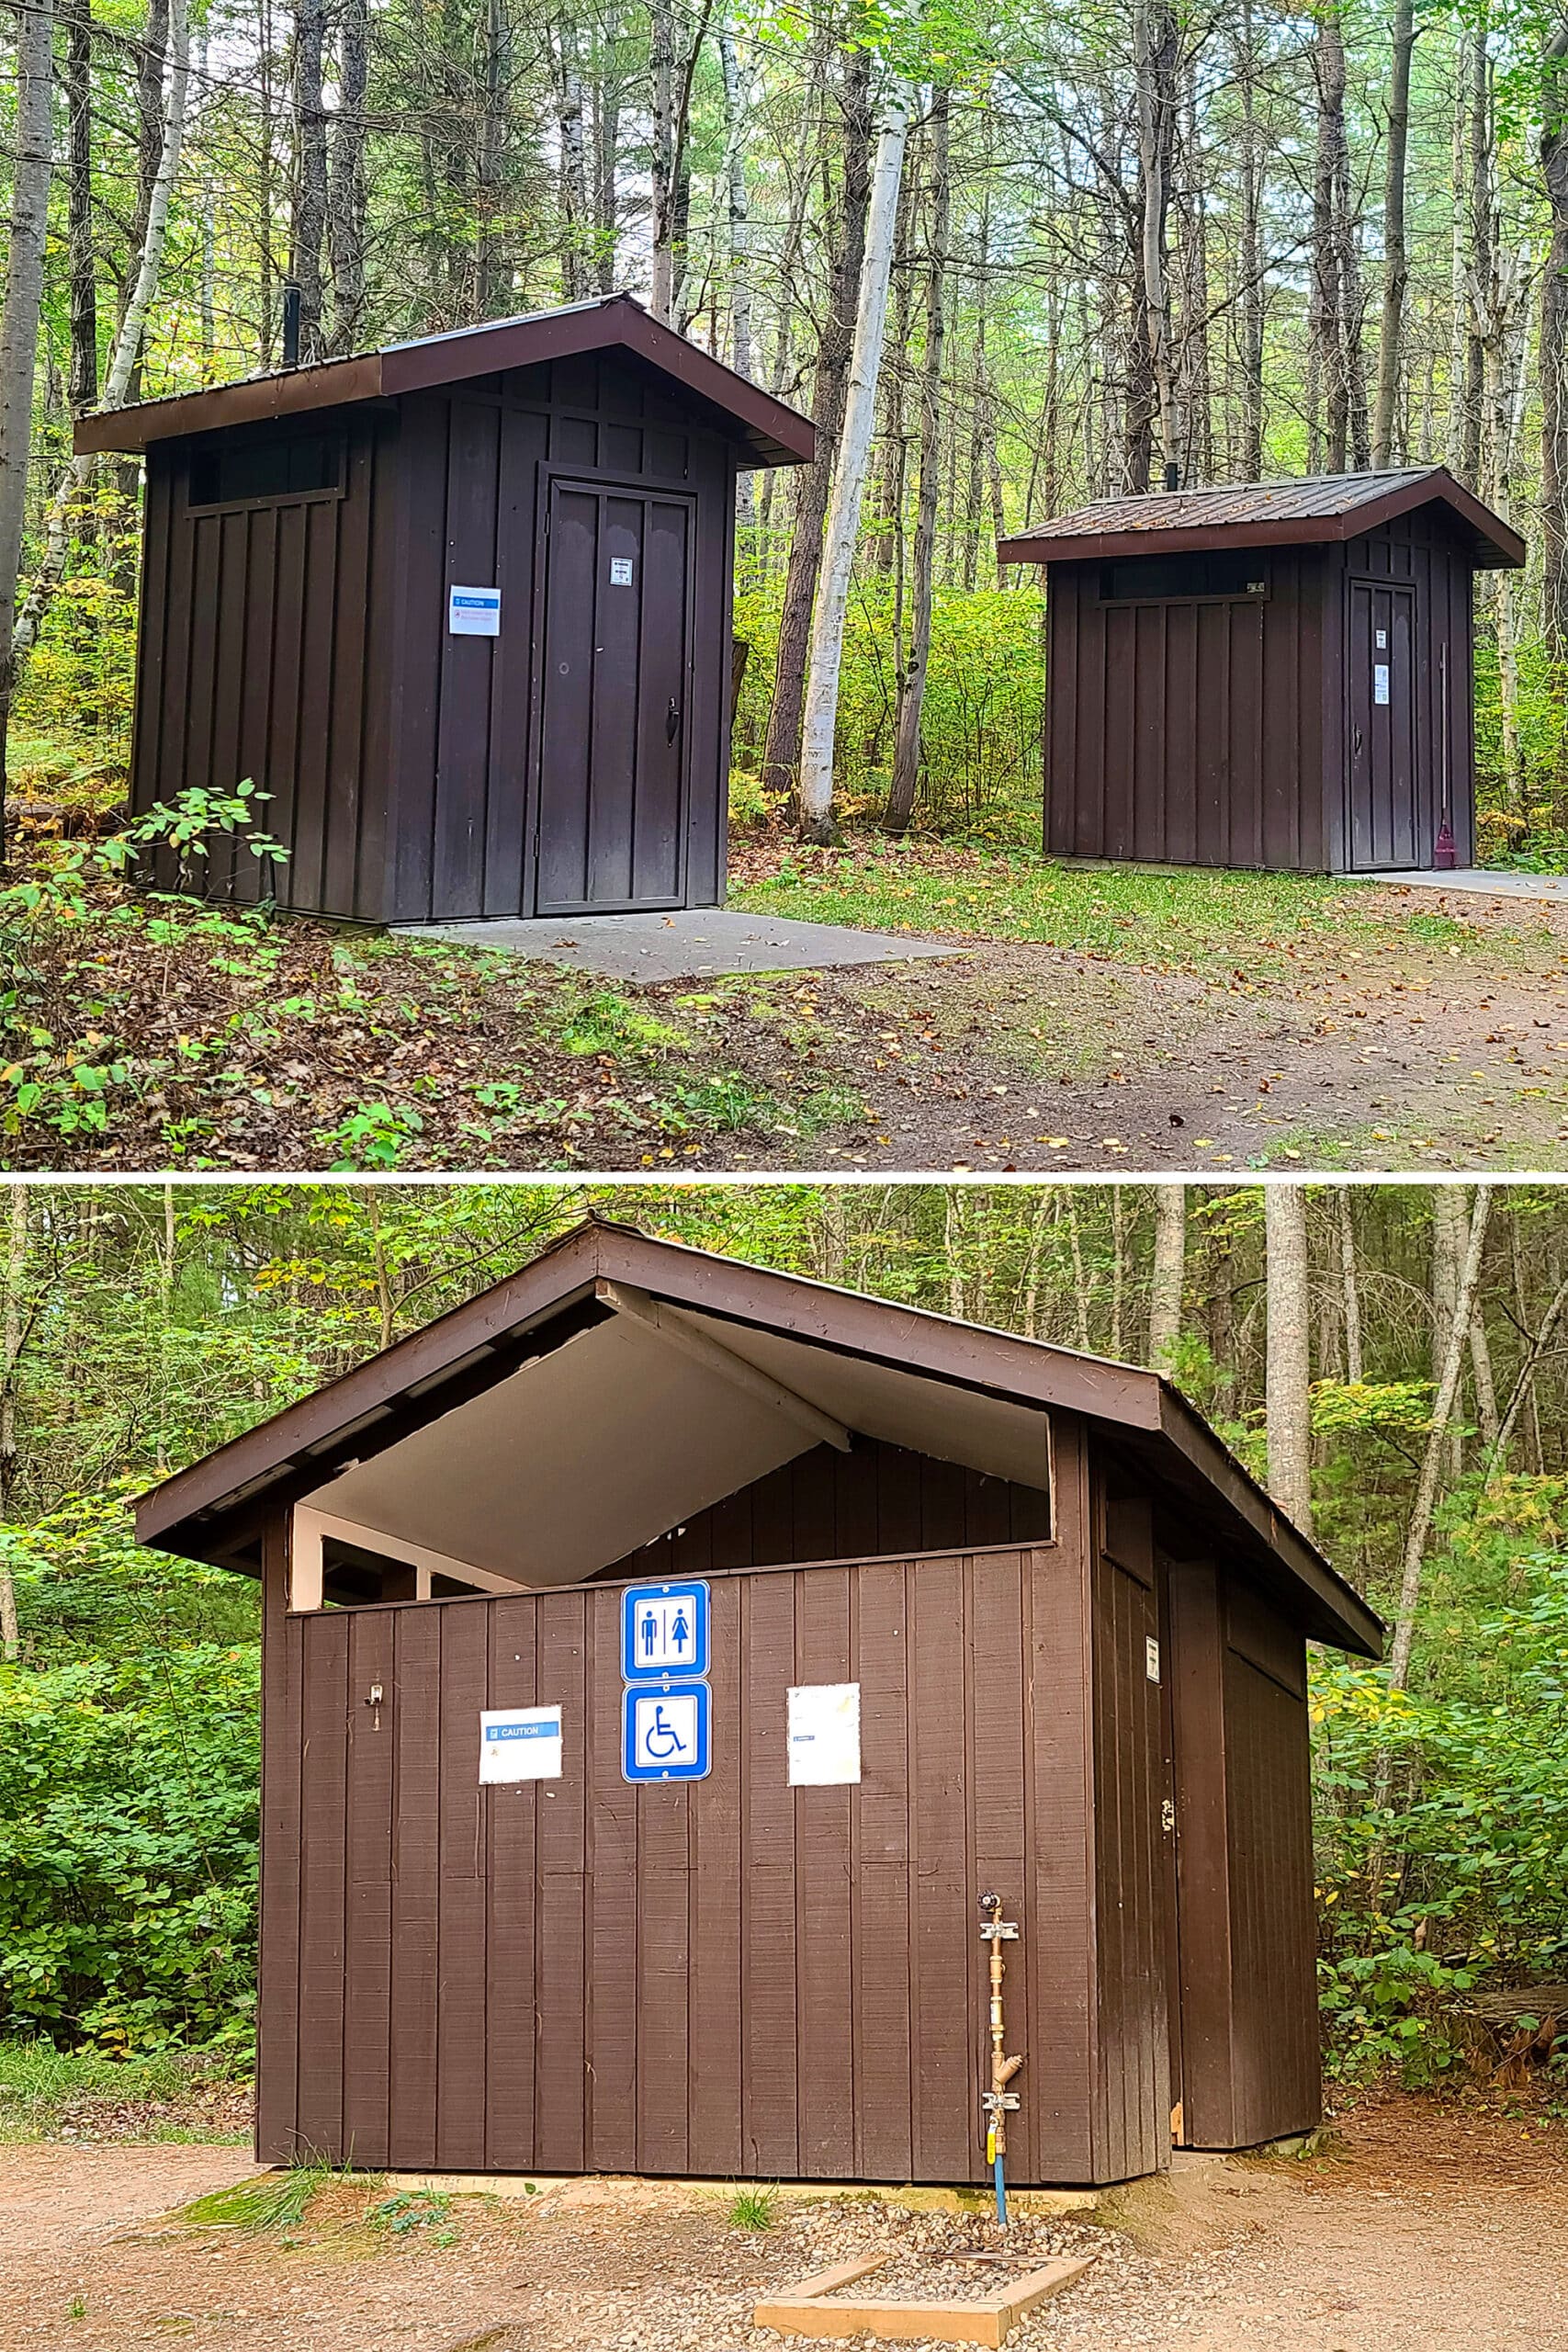 2 part image showing a couple different outhouses, one with an accessible symbol on it.